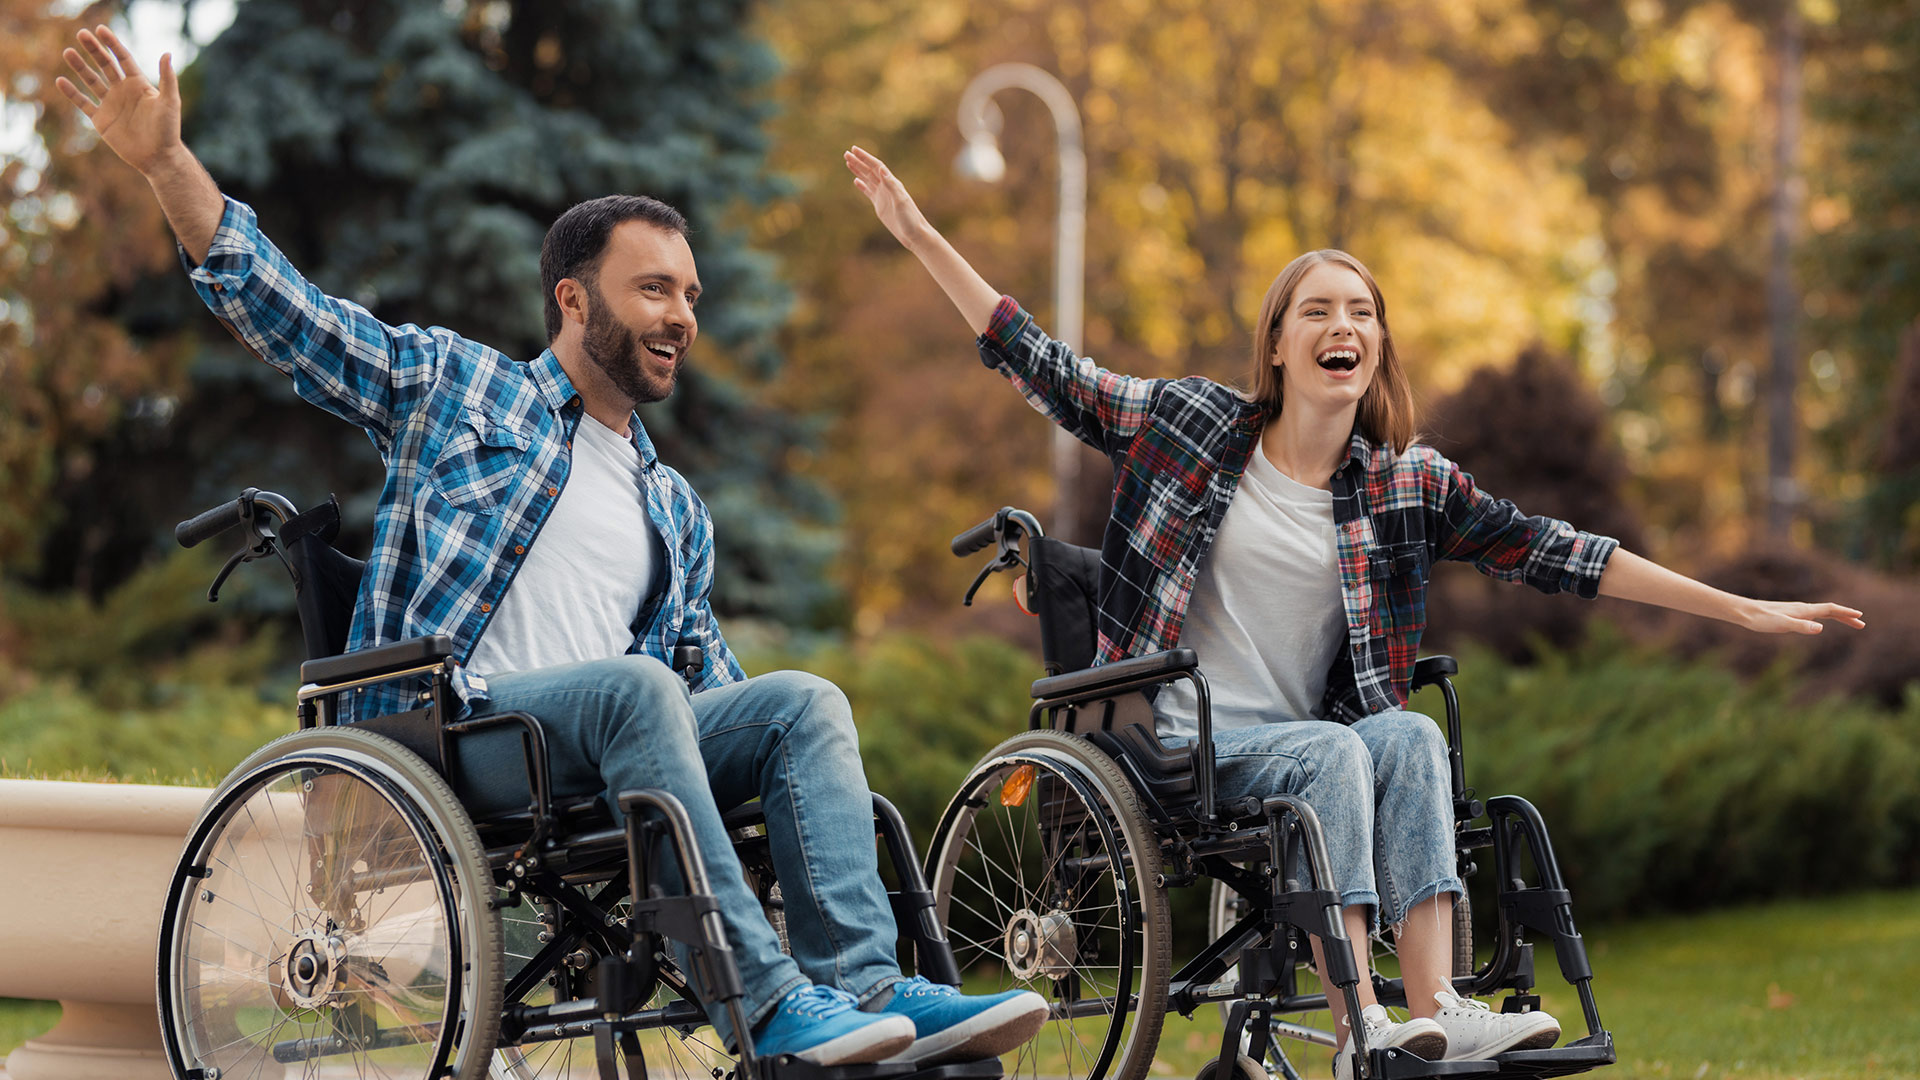 Couple in wheel chairs having fun in a park